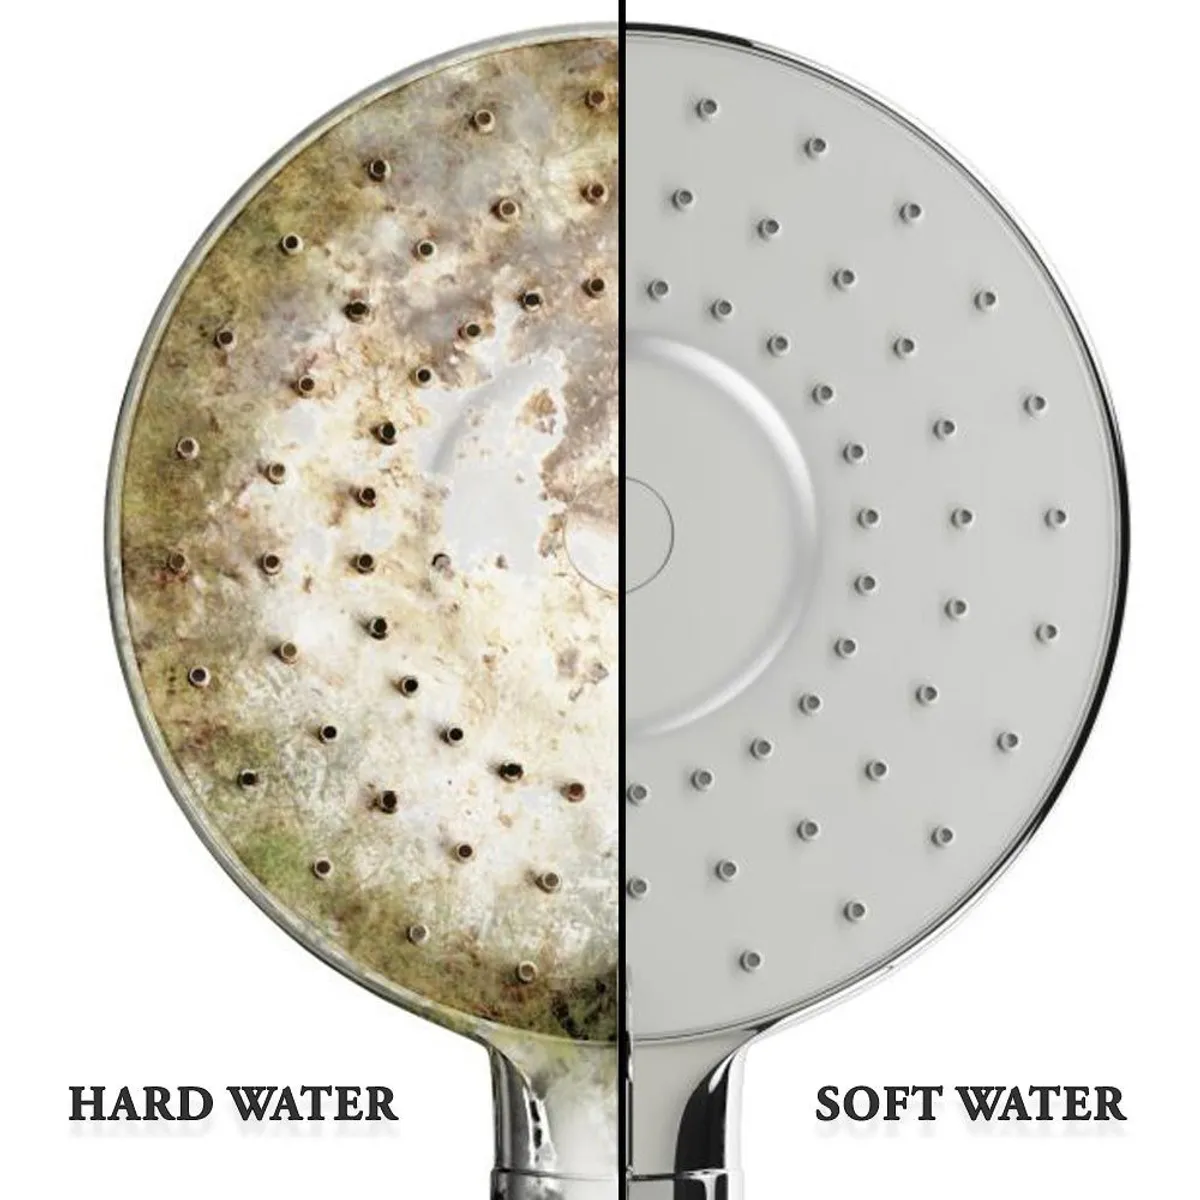 Signs you have hard water